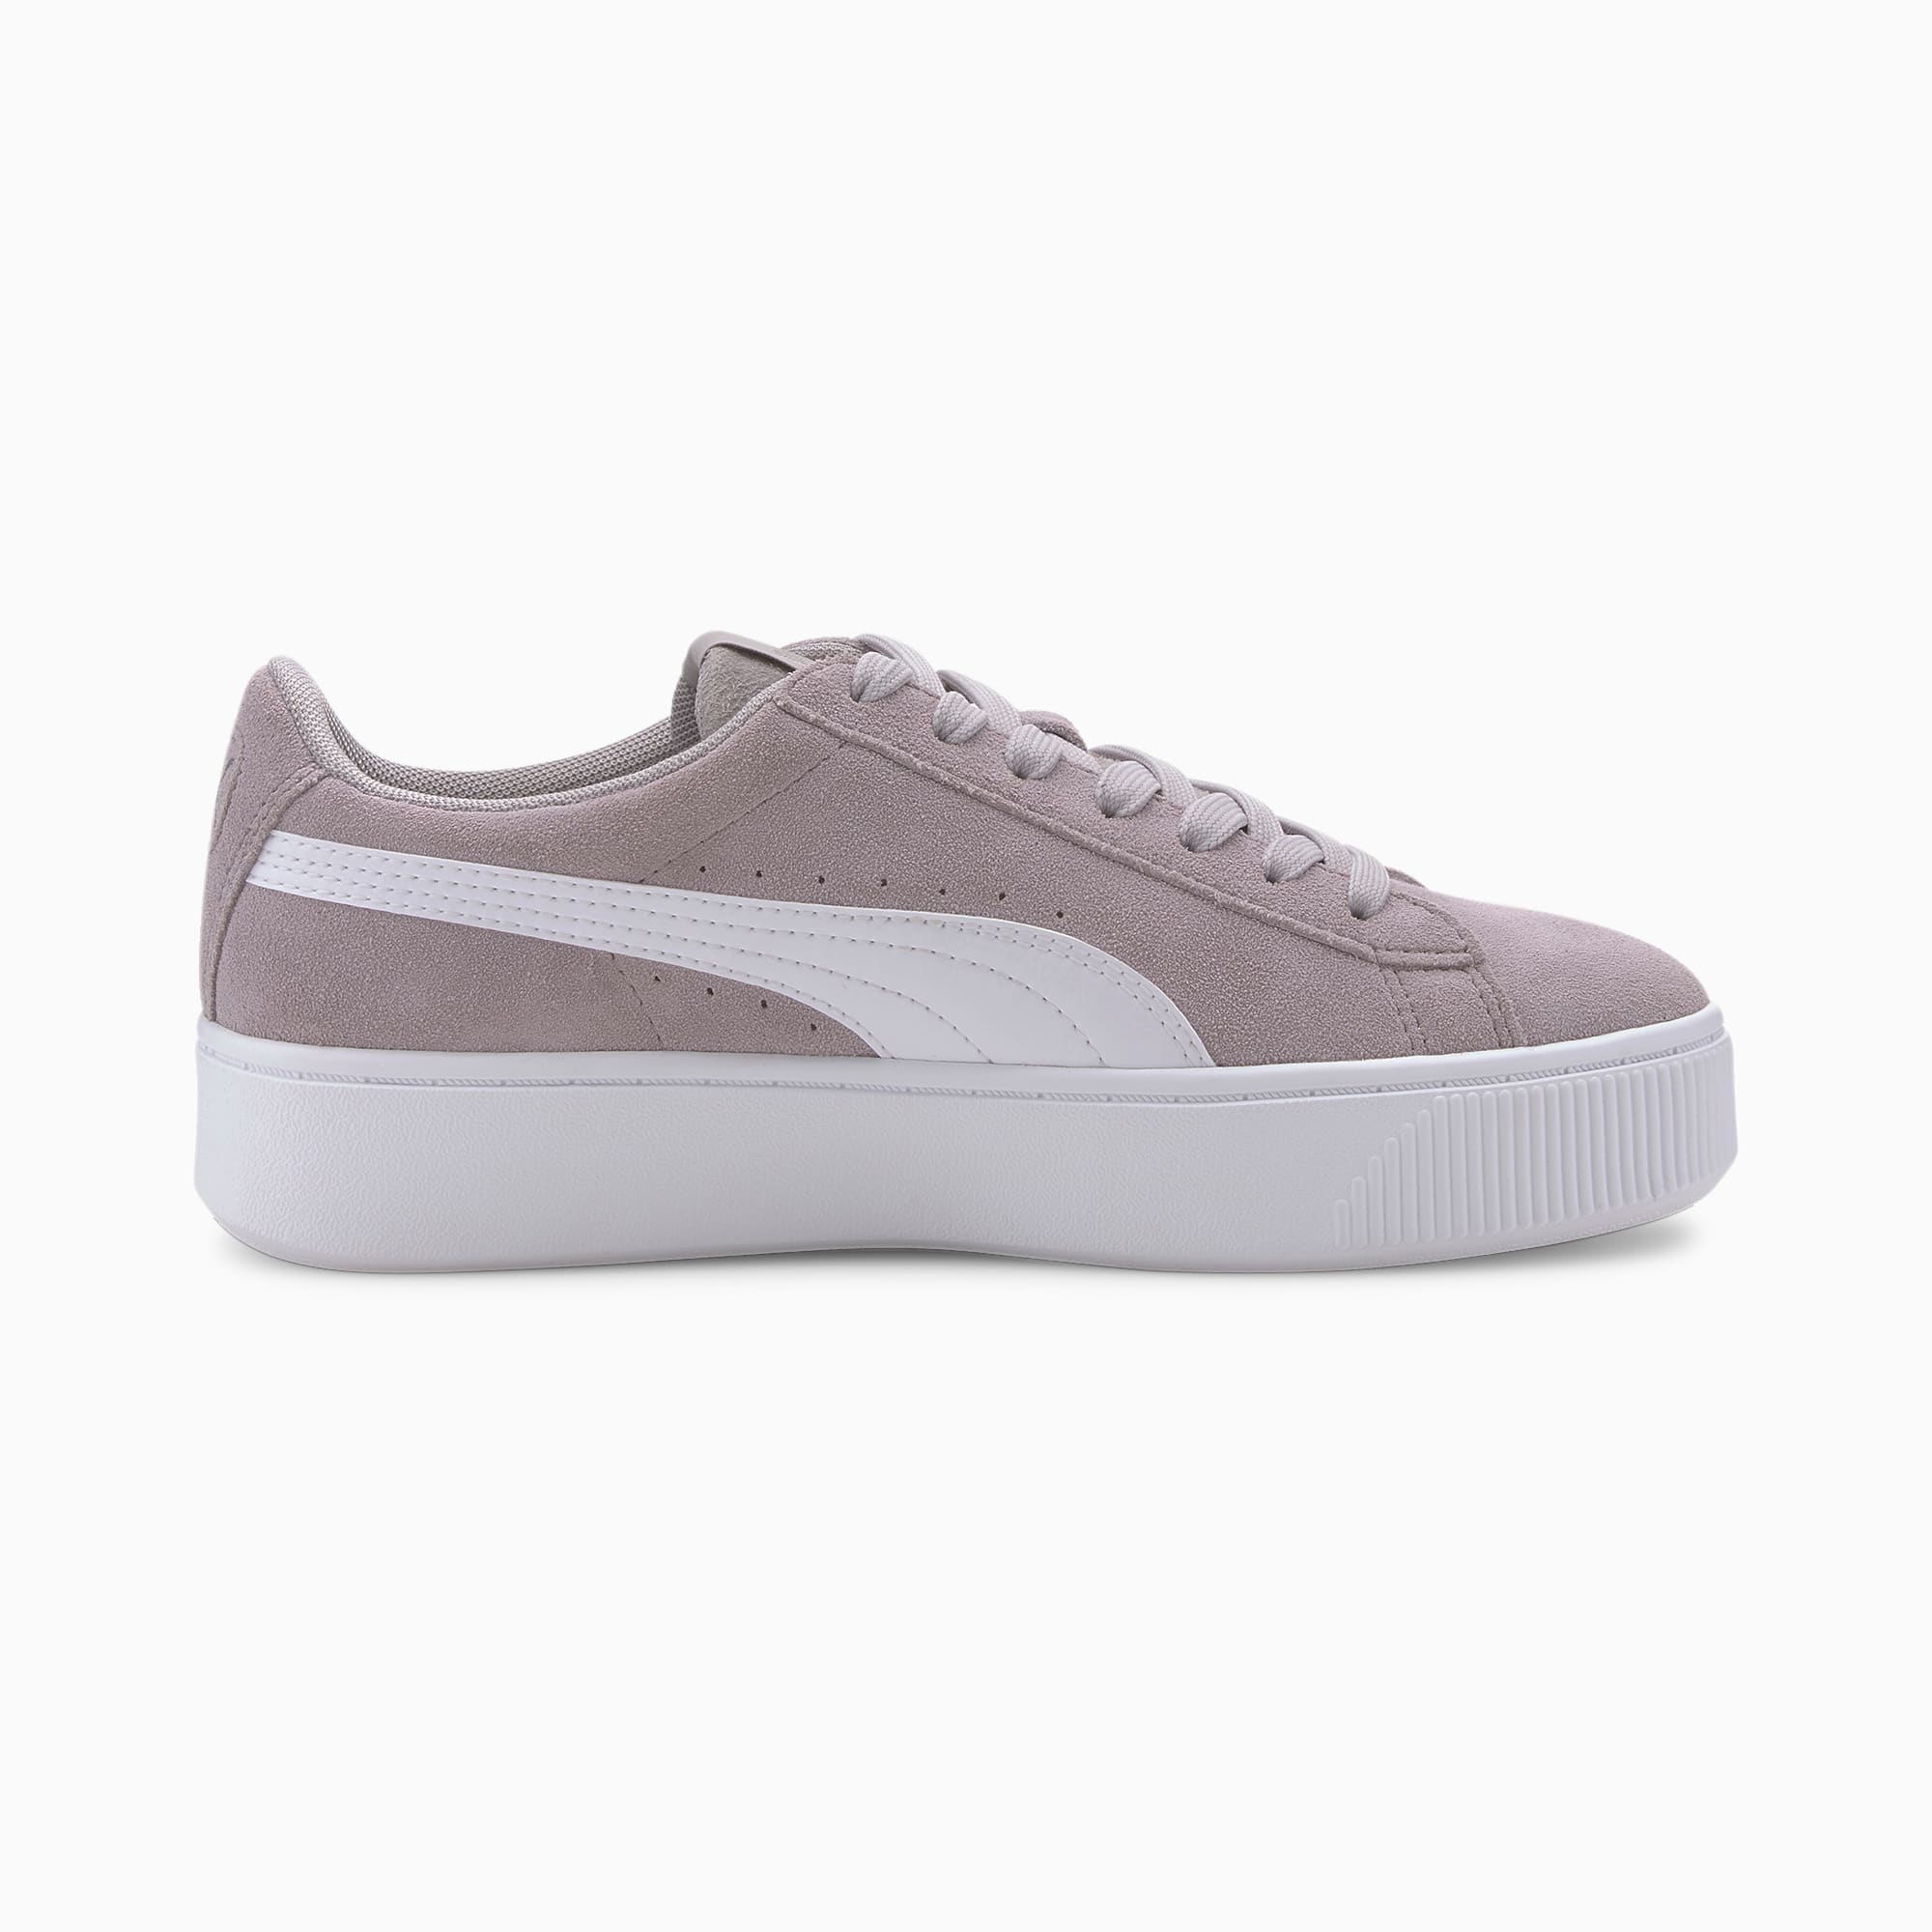 PUMA Vikky Stacked Women's Trainers 